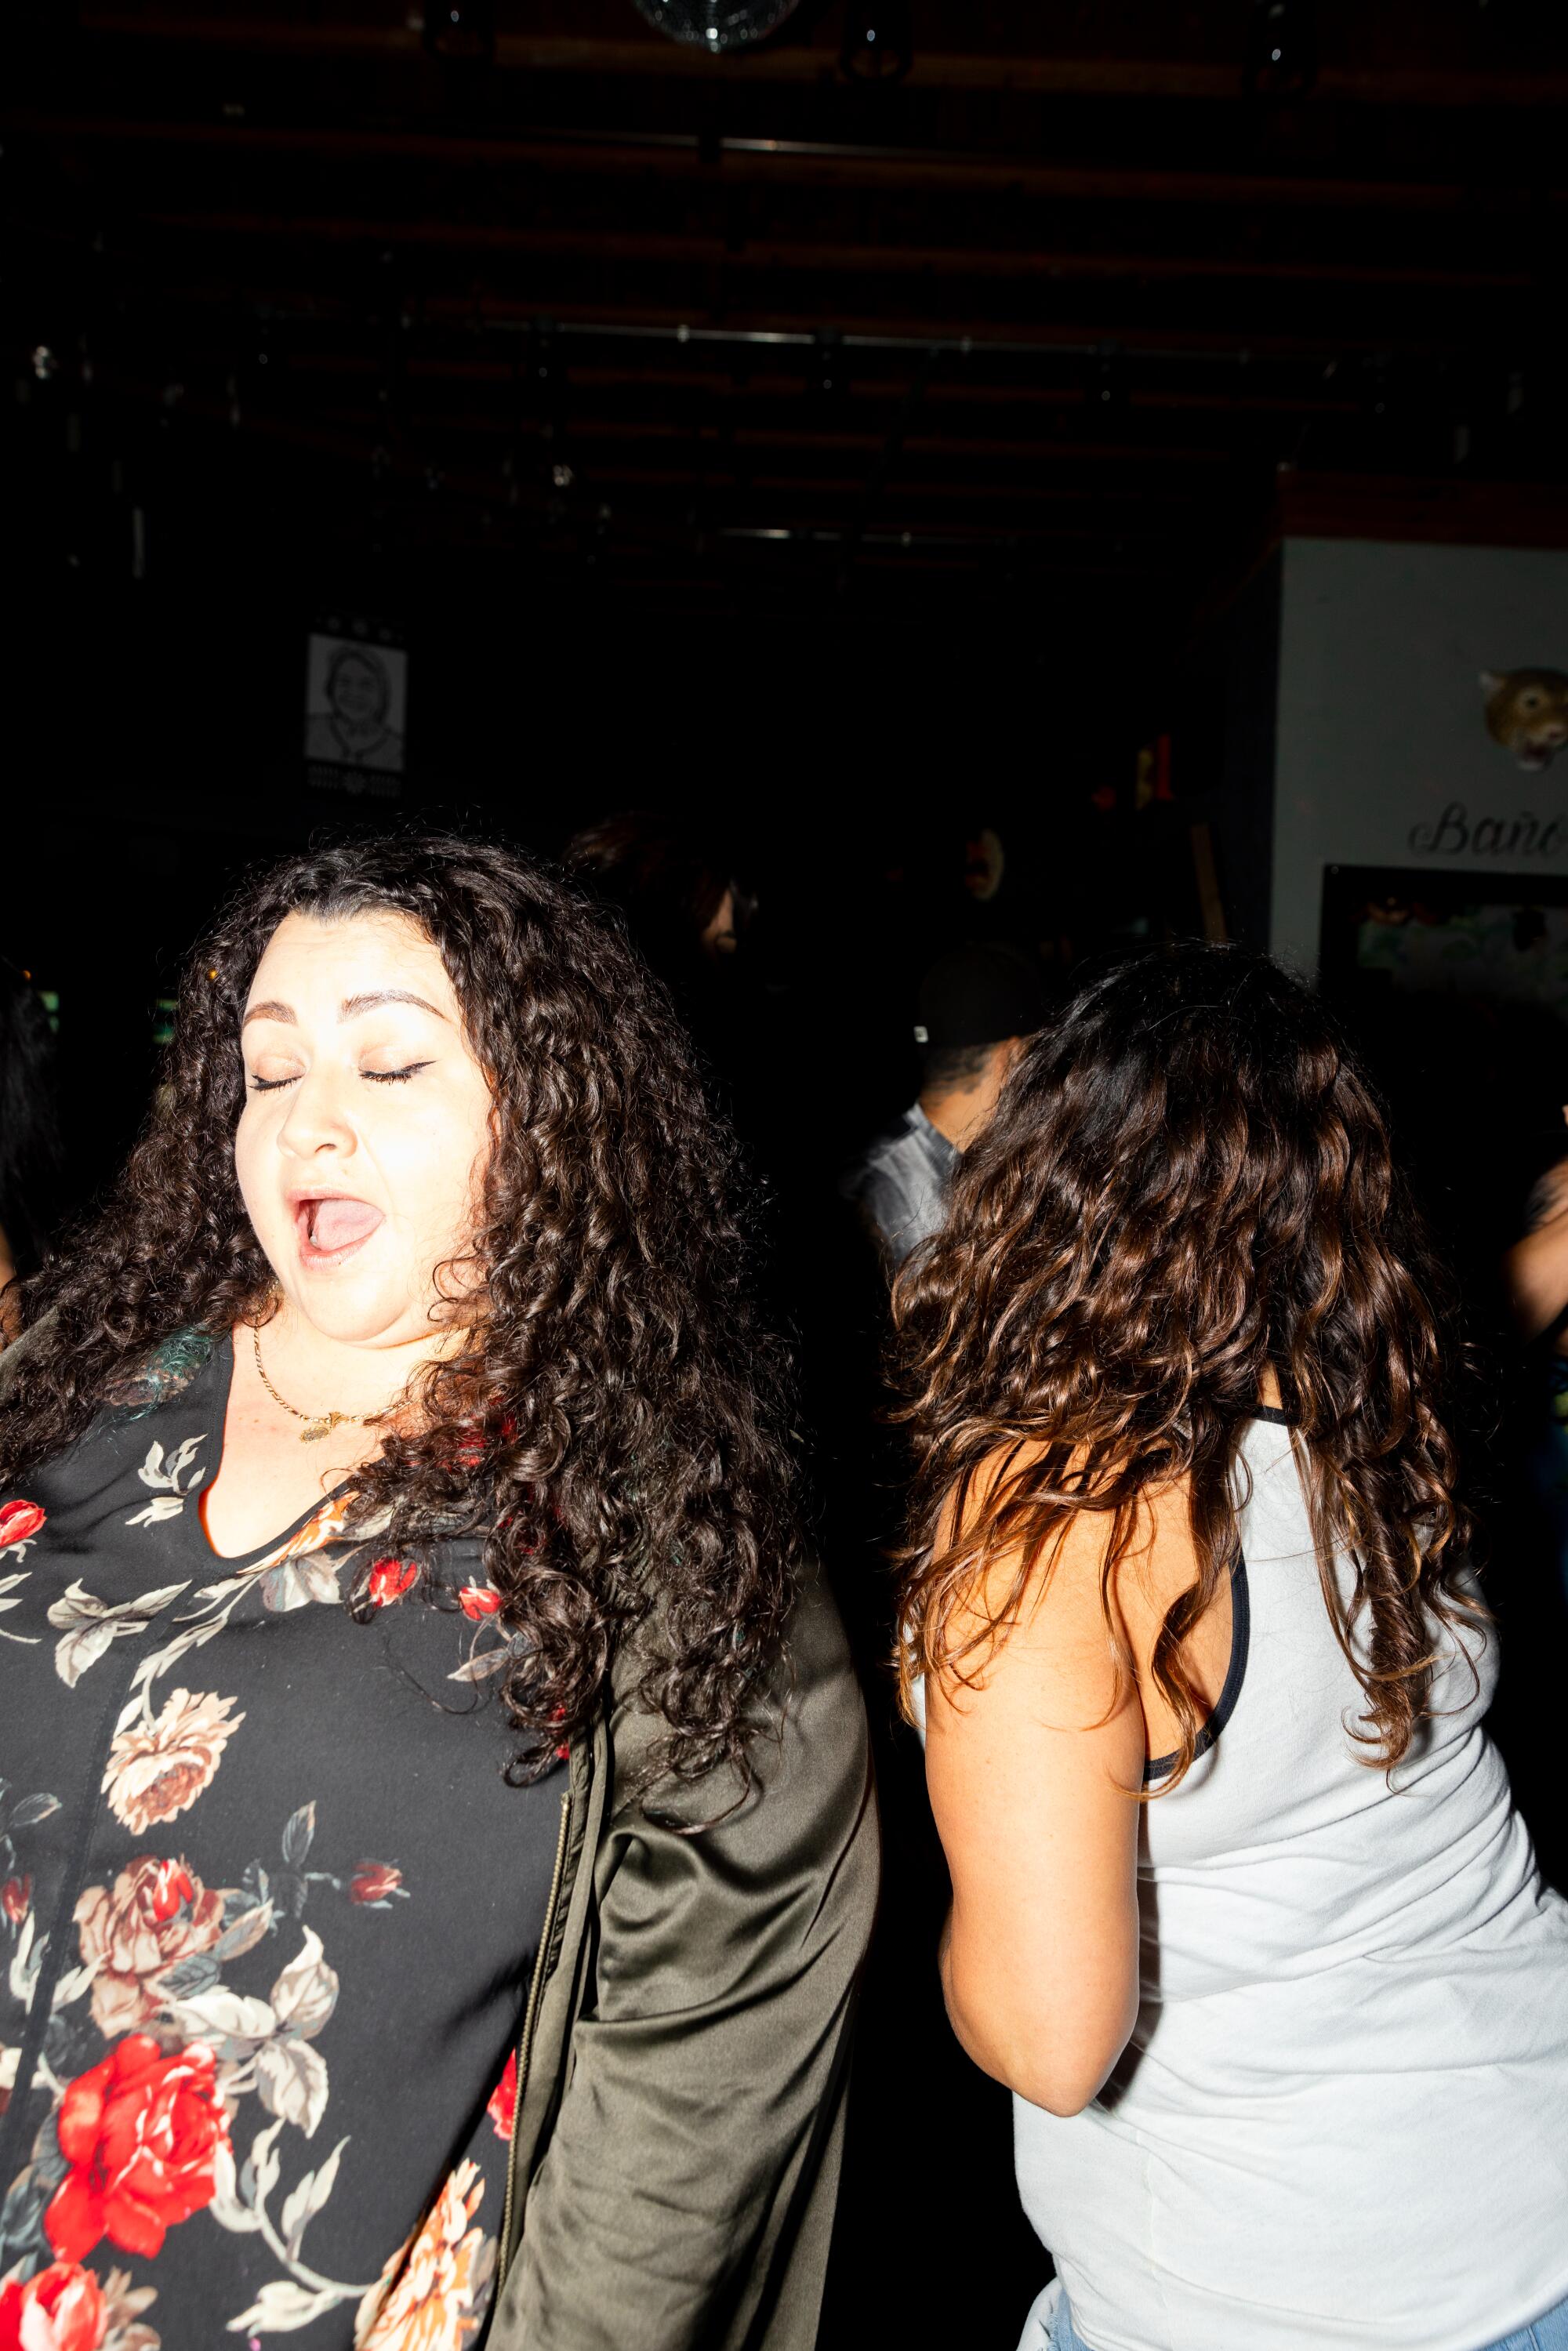 Dancers sing along to cumbia music at Toxica Fridays at Mi Corazón.